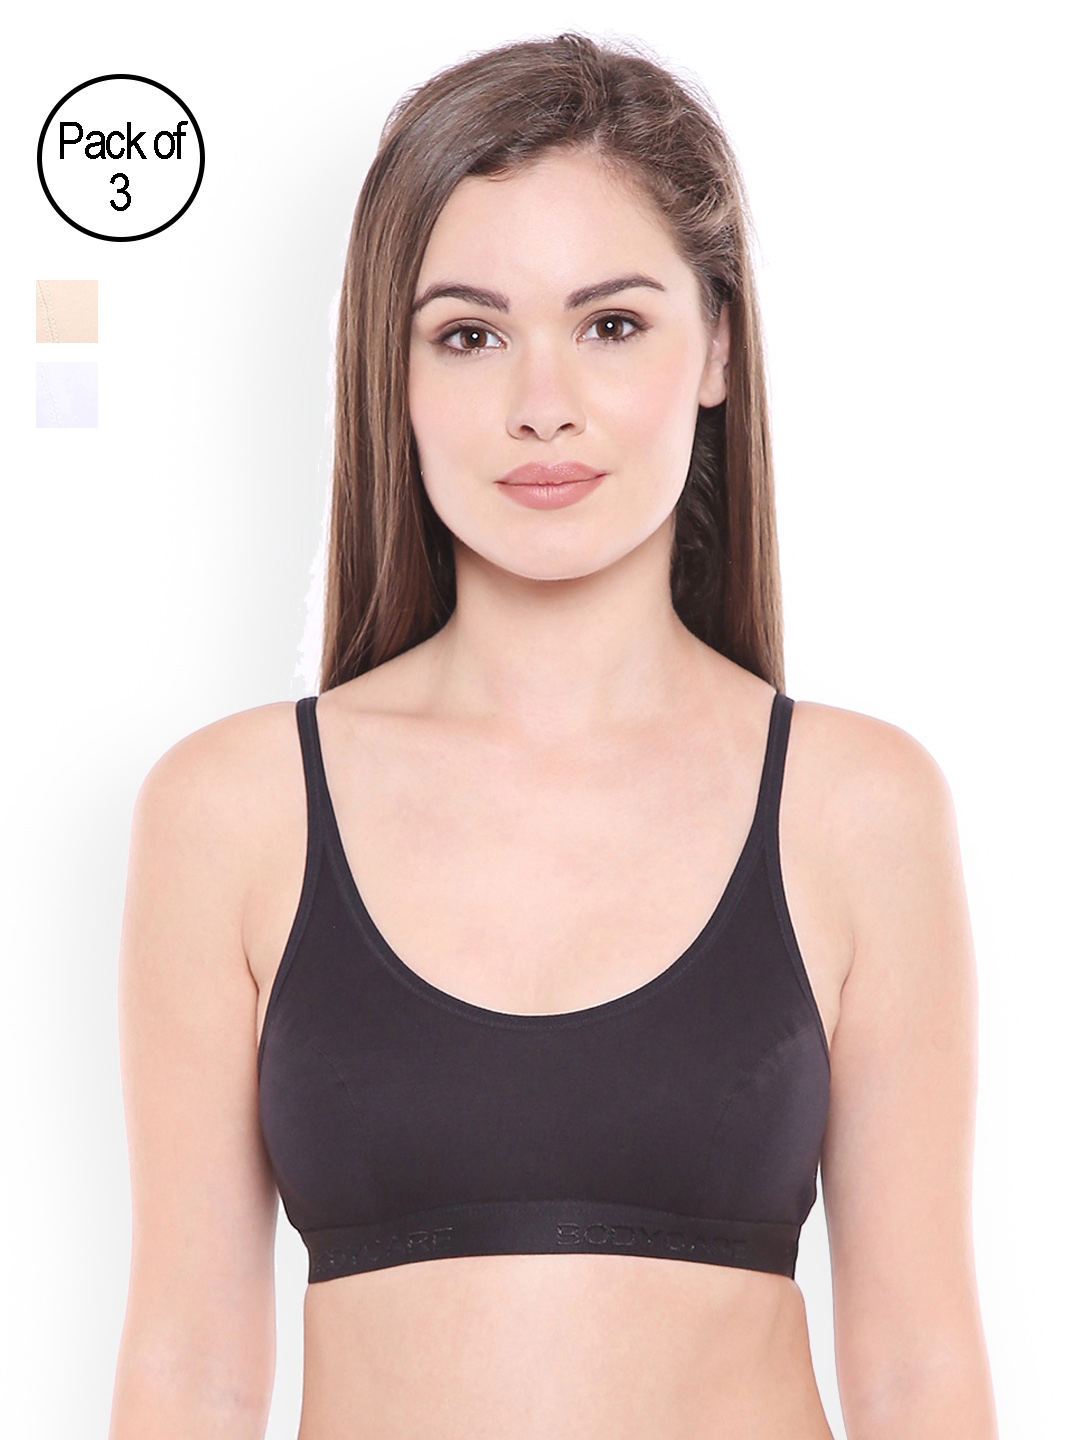 Jockey 32B Size Bras Price Starting From Rs 1,260. Find Verified